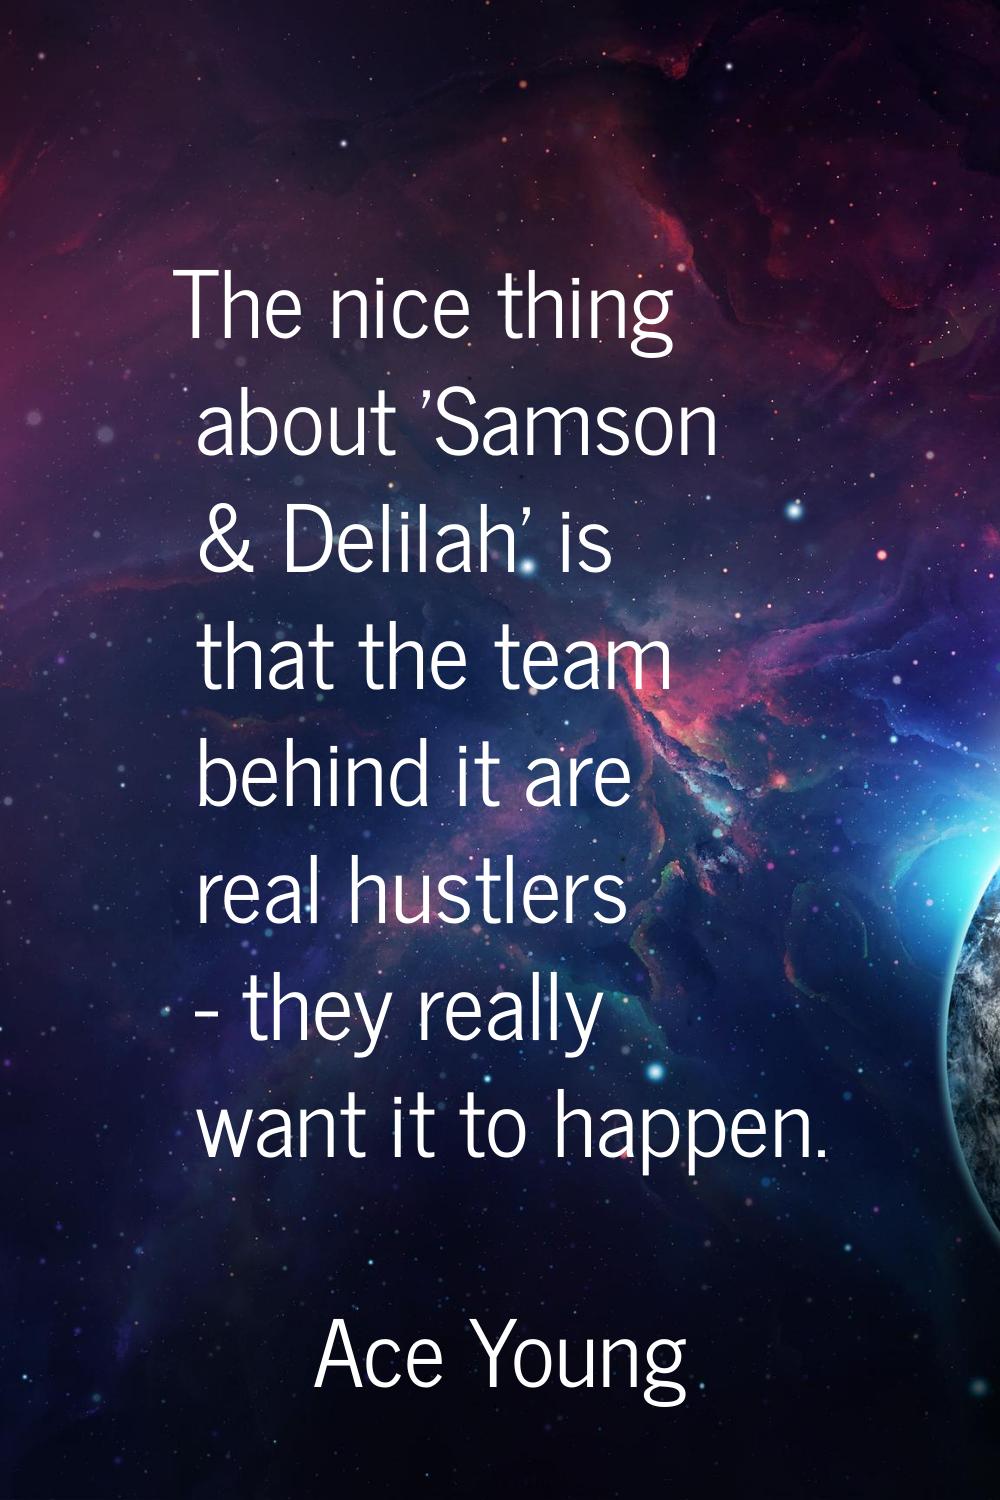 The nice thing about 'Samson & Delilah' is that the team behind it are real hustlers - they really 